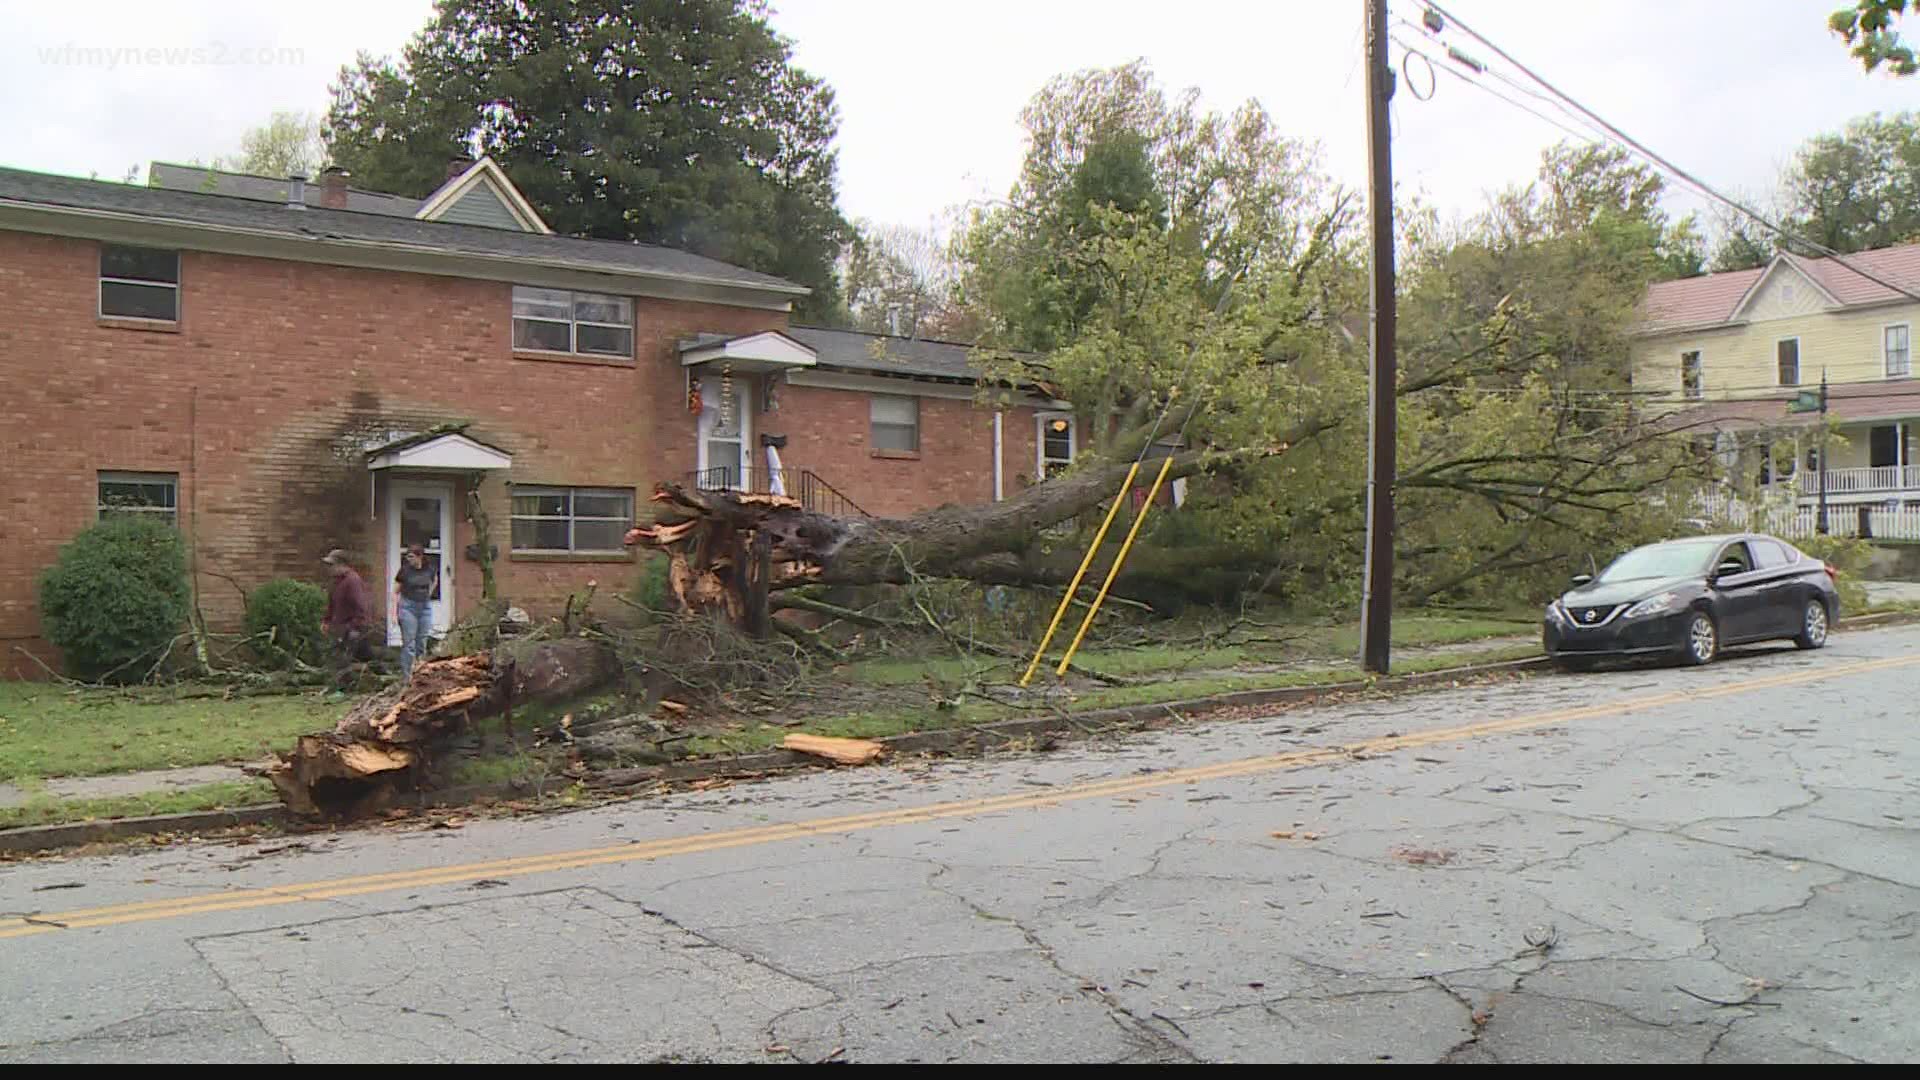 Residents in Guilford County are dealing with downed trees and power lines, as well as power outages after Hurricane Zeta sent high winds and storms to the Triad.